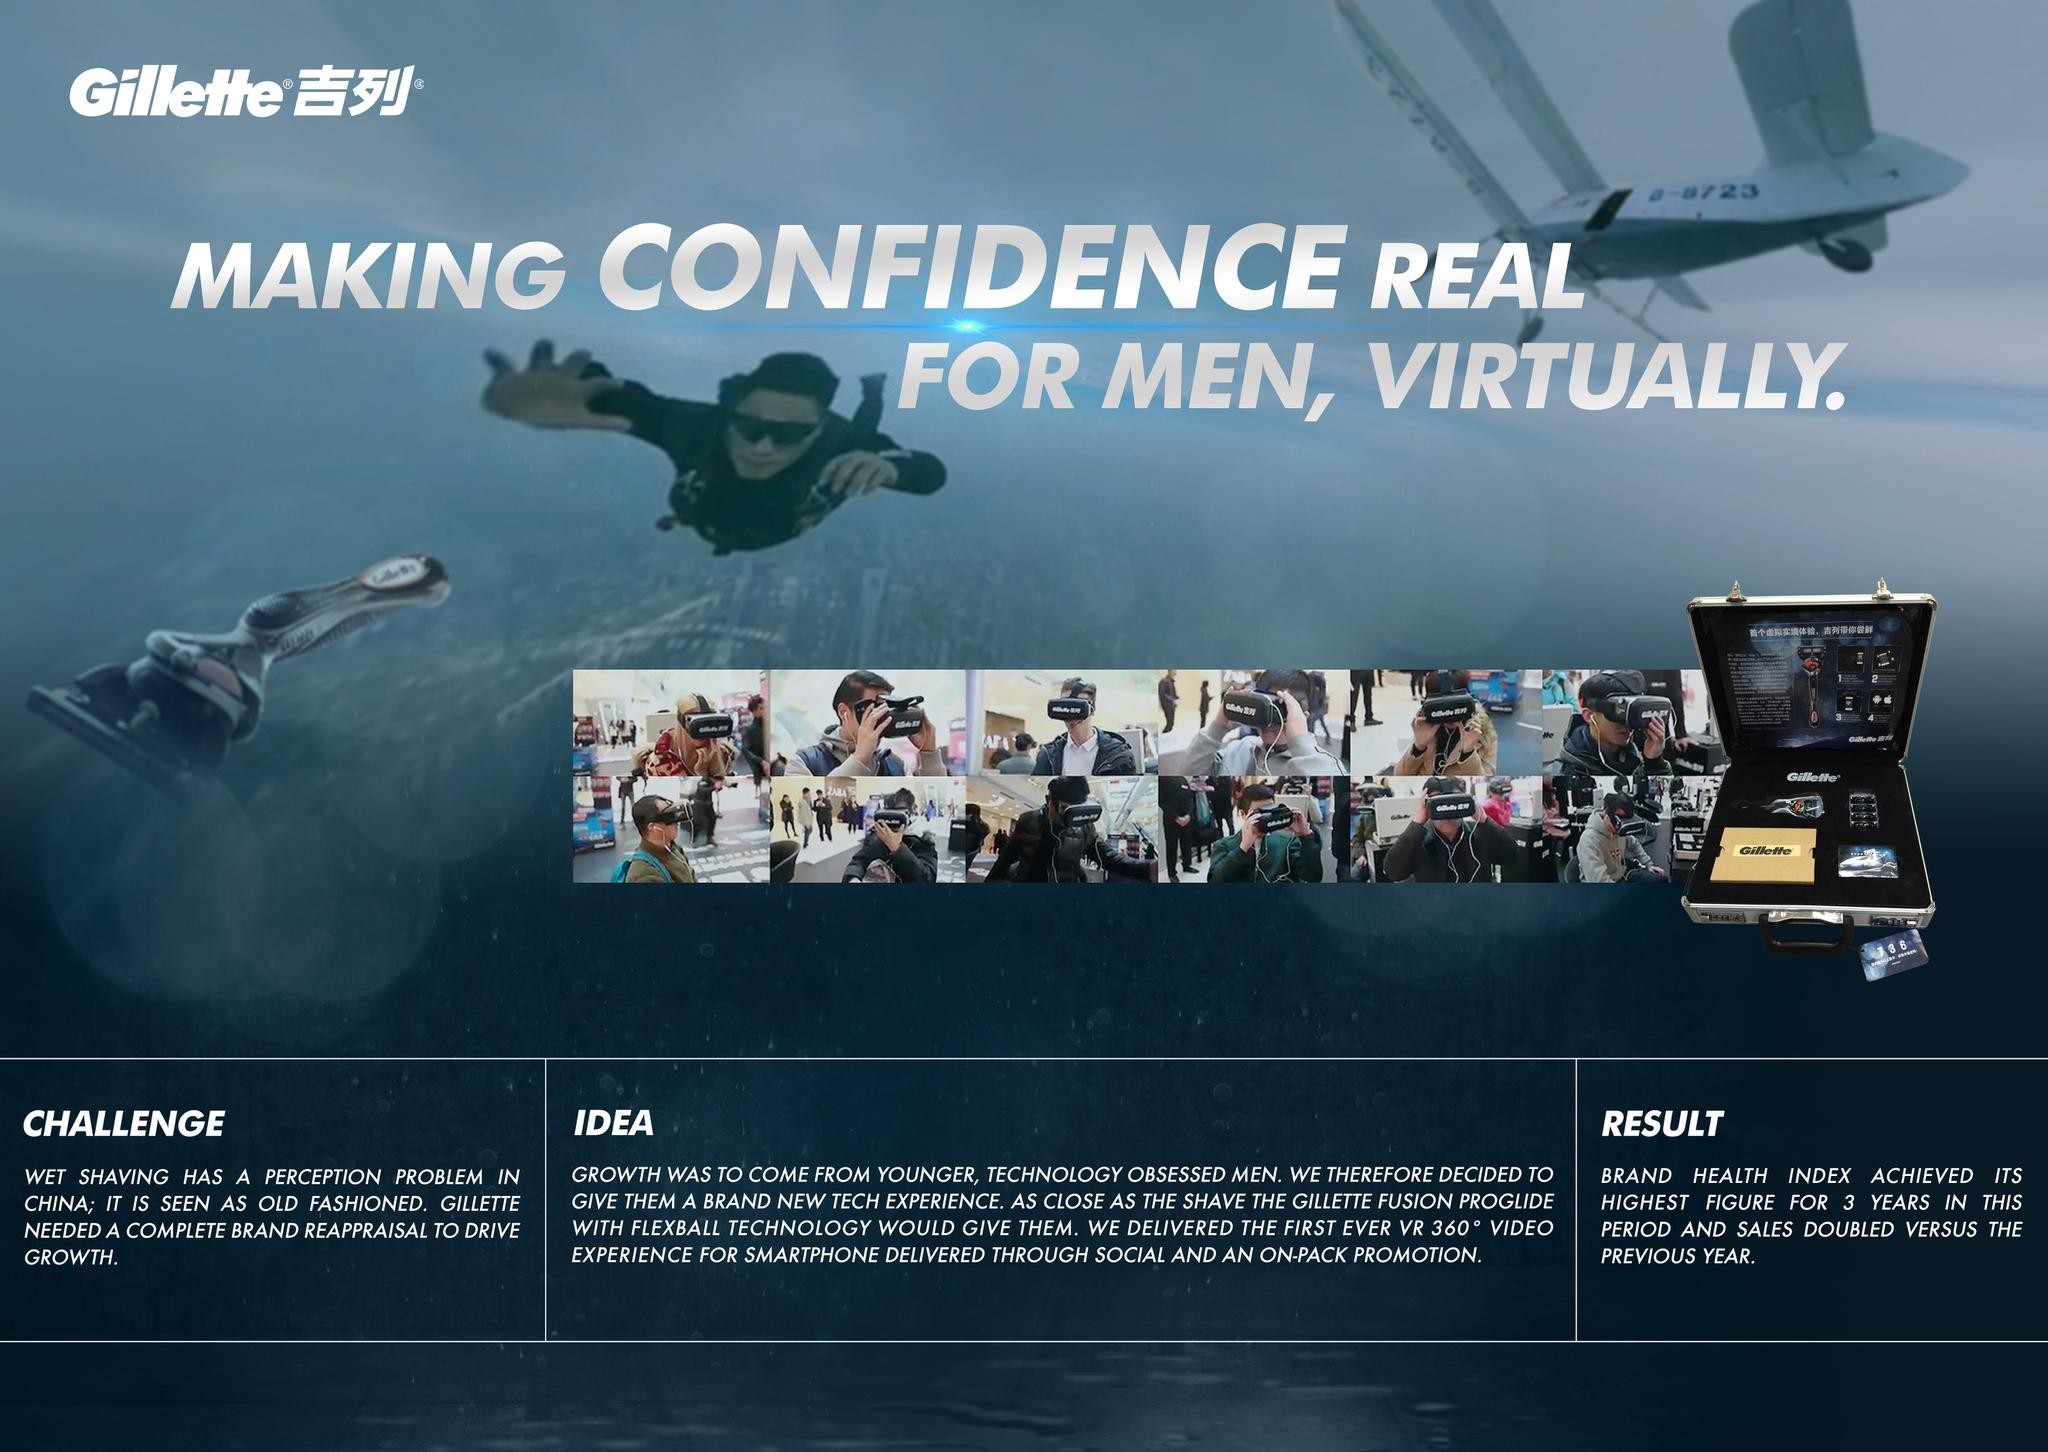 Making Confidence Real for Men, Virtually